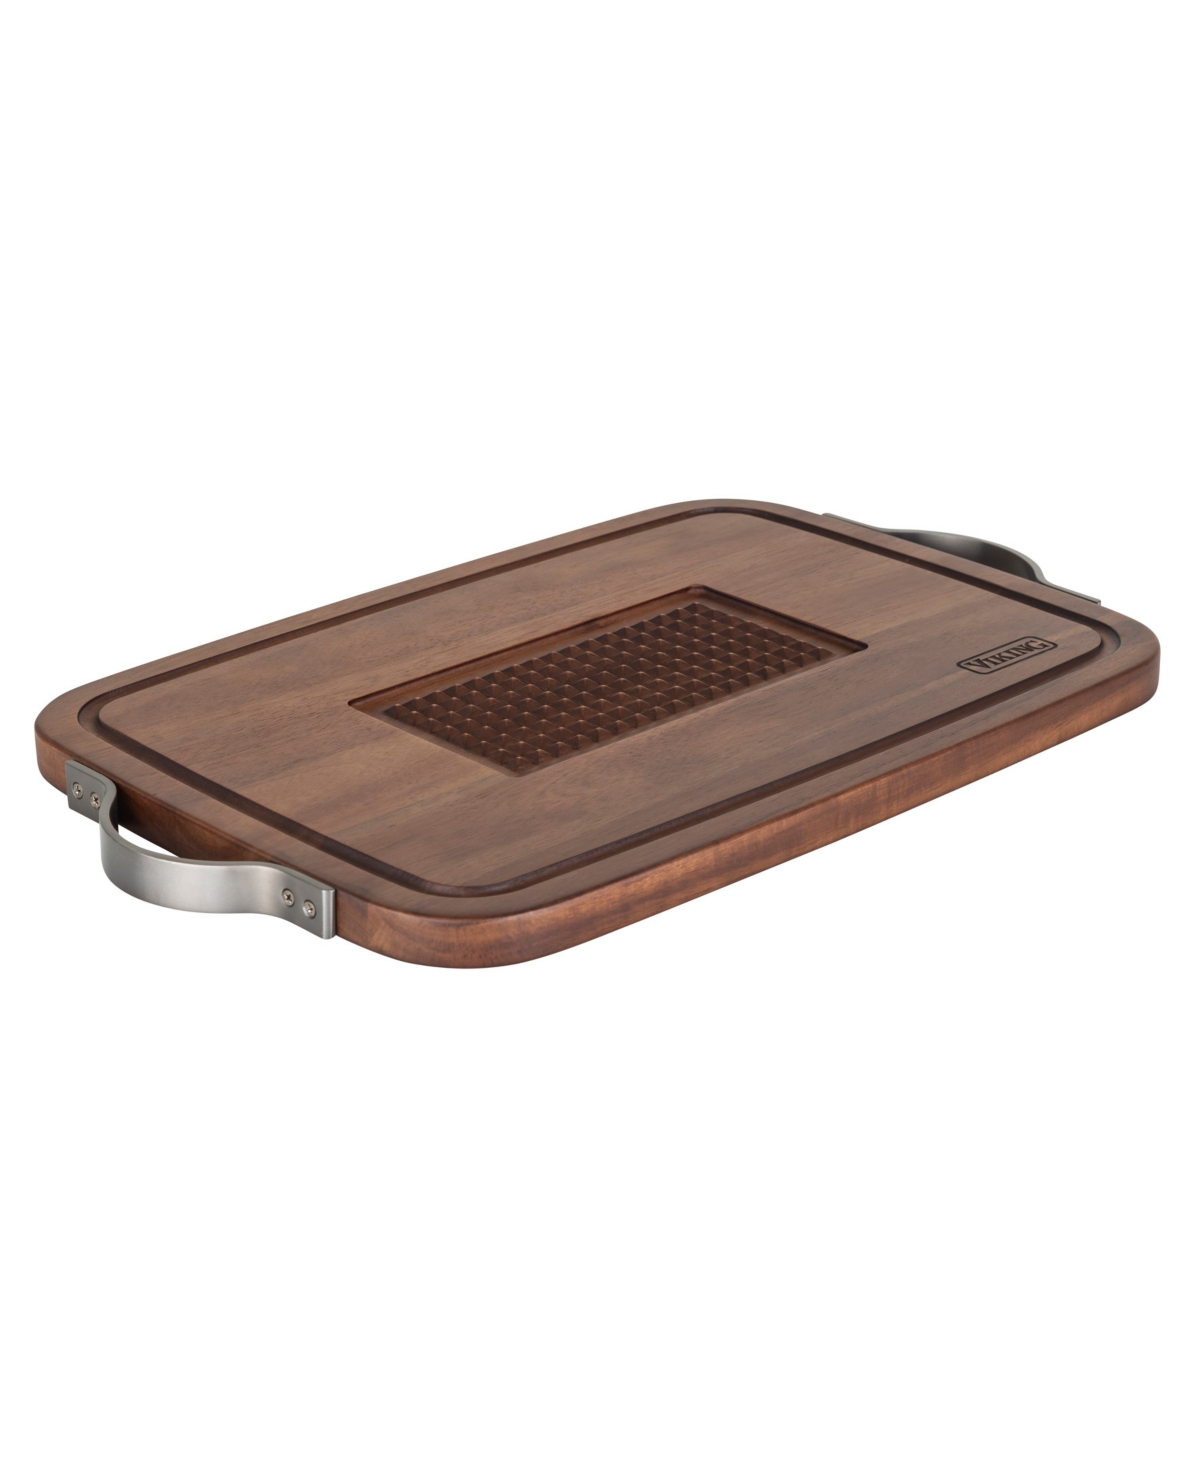 Viking Acacia Carving Board With Juice Well And Metal Handles In Multicolor